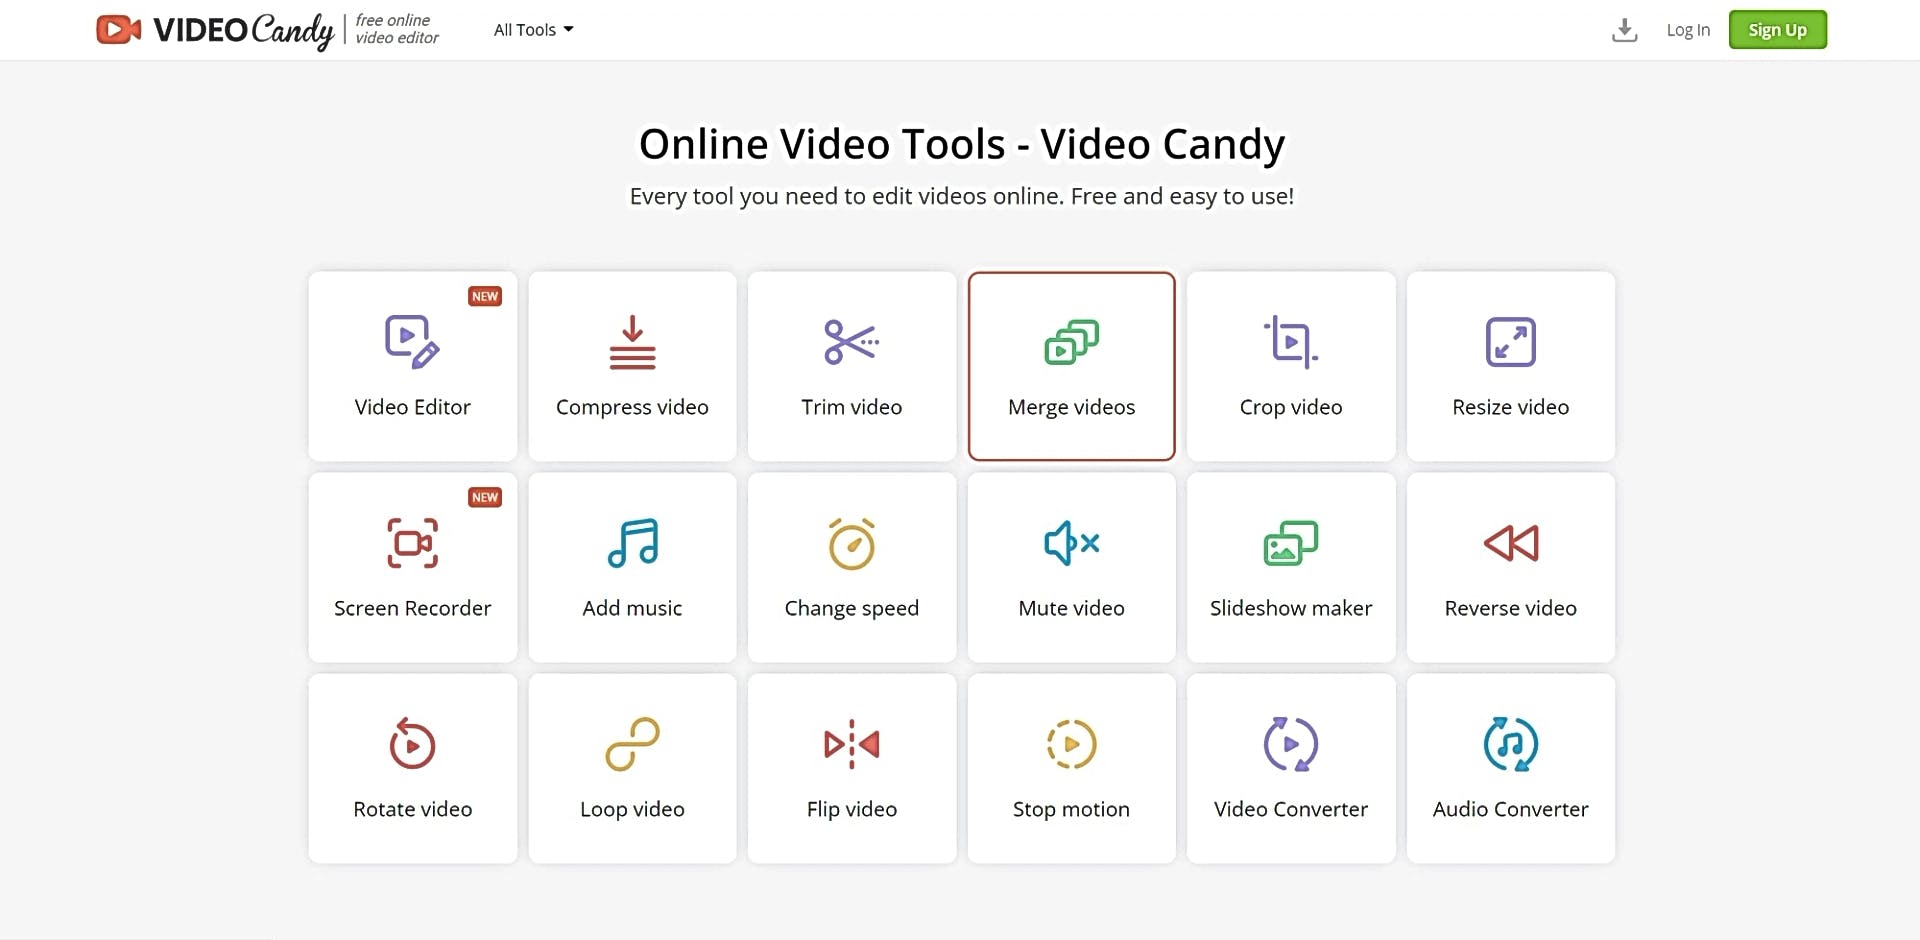 Video Candy featured